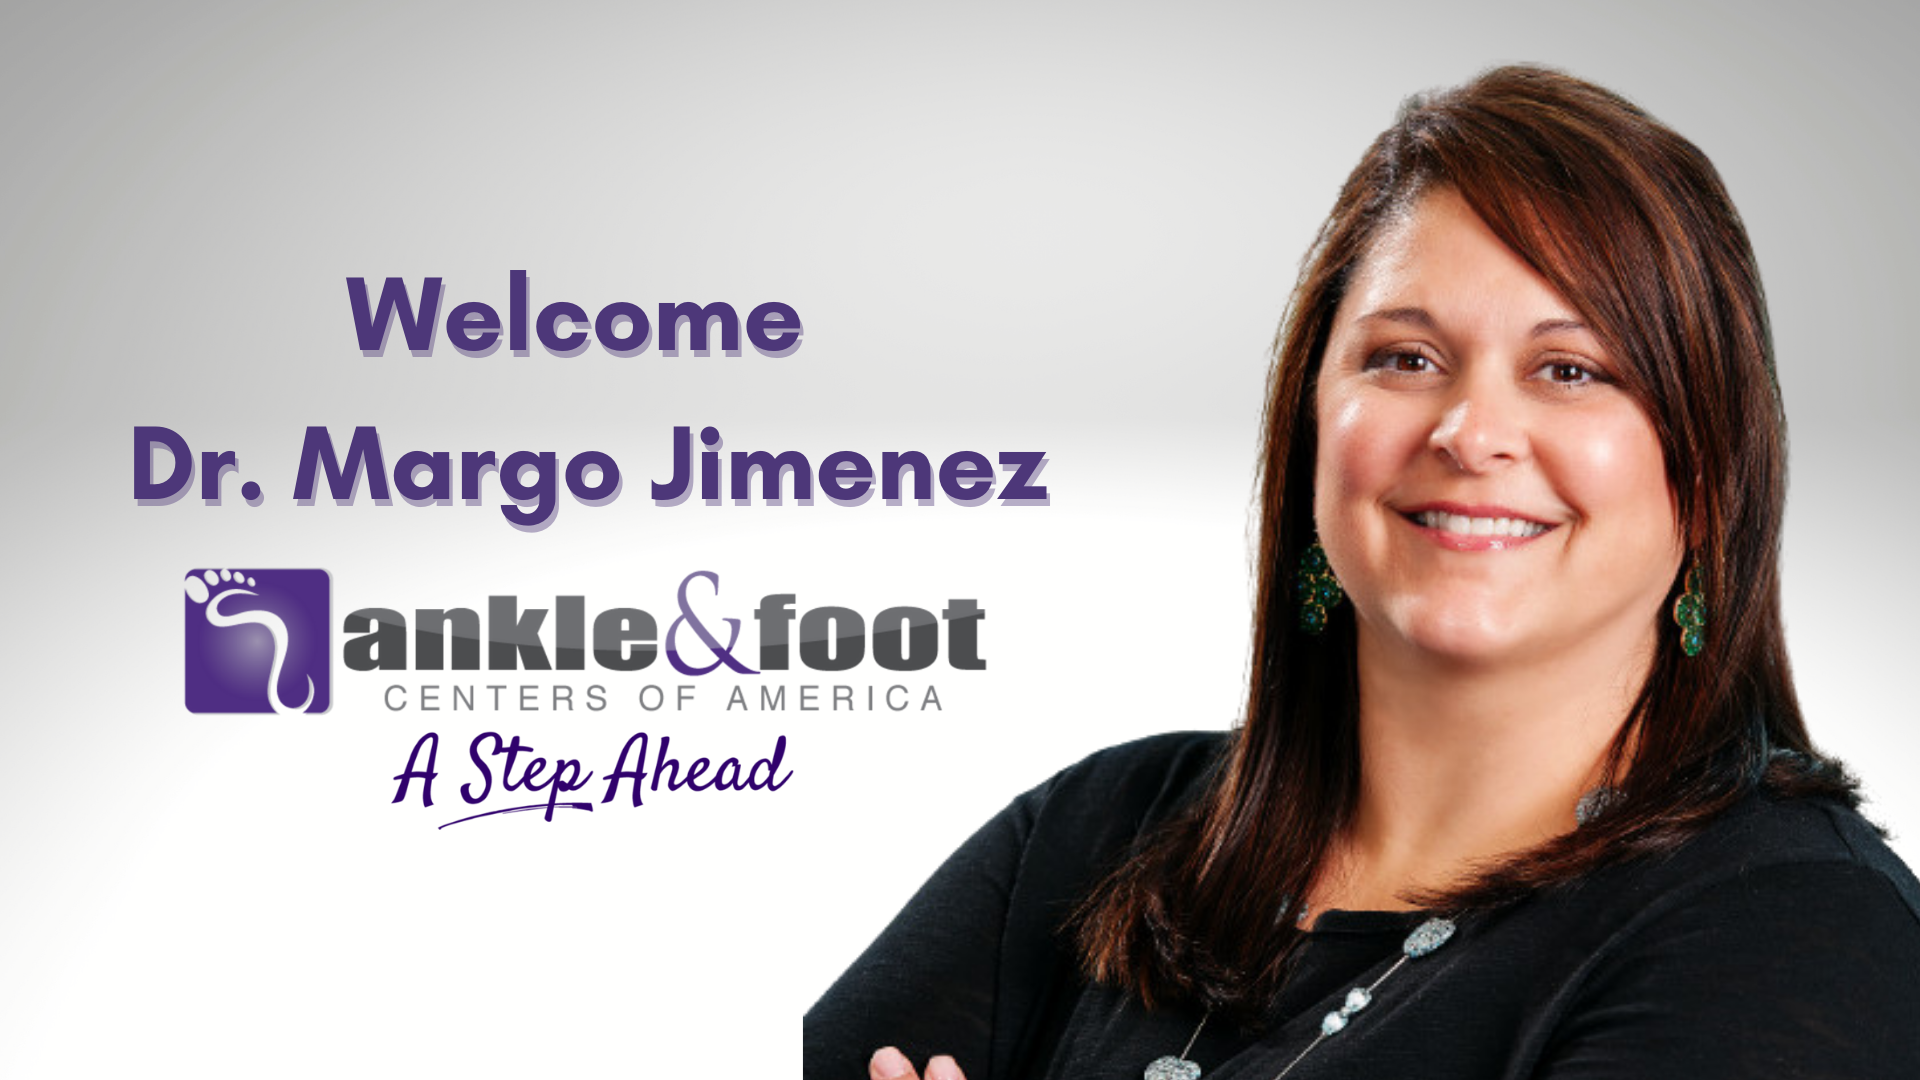 Dr. Margo A. Jimenez joins Ankle & Foot Centers